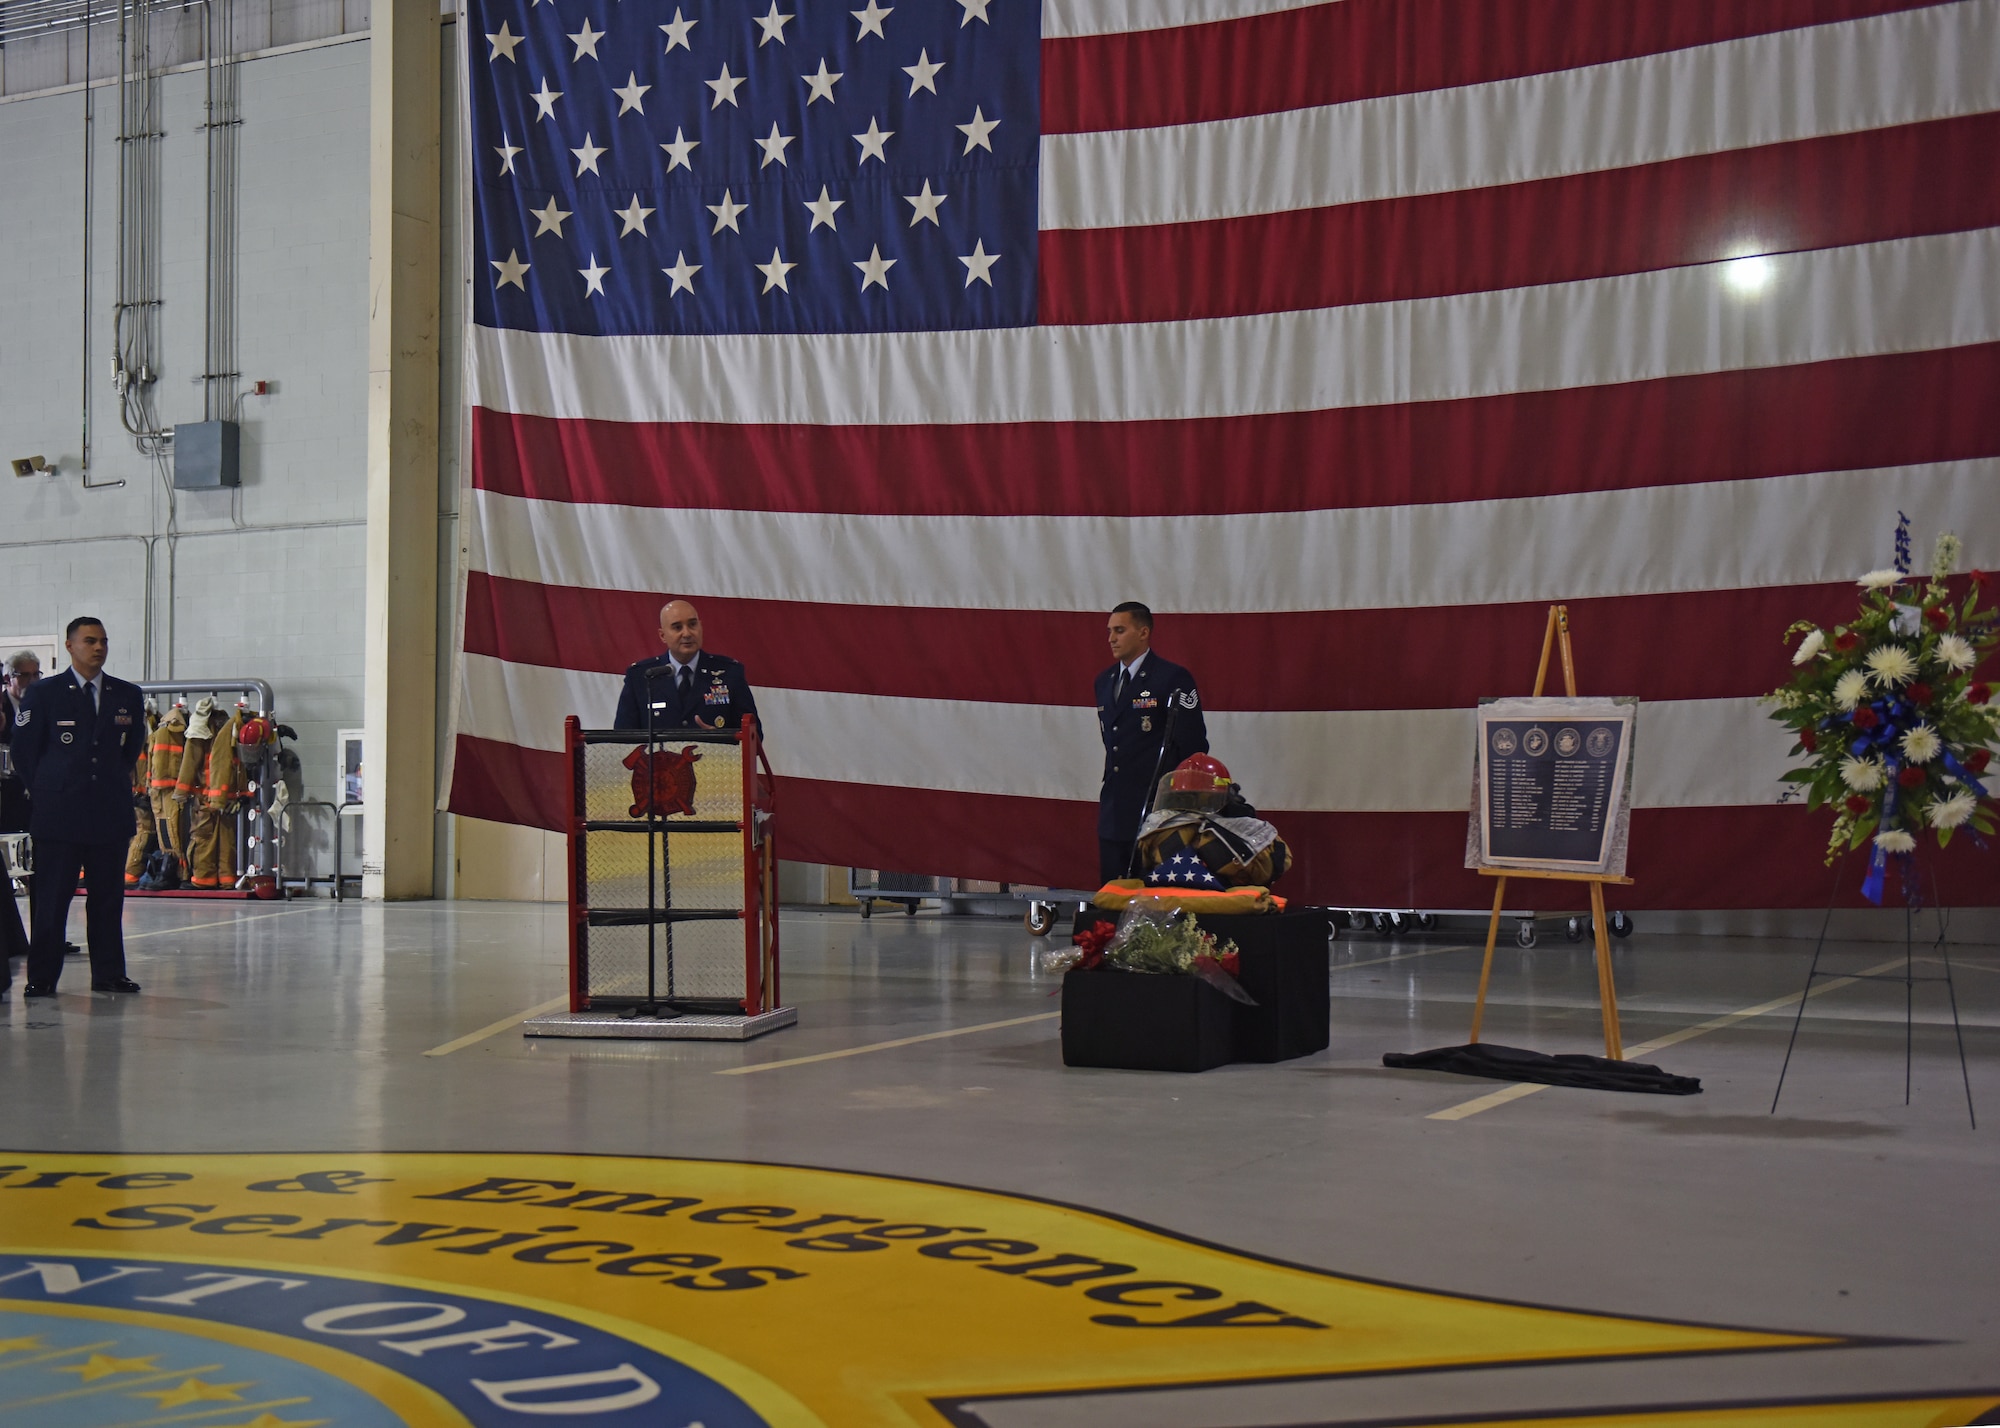 U.S. Air Force Col. Robert Ramirez, 17th Training Wing vice commander, speaks during the Firefighter Memorial Ceremony in the Louis F. Garland Department of Defense Fire Academy High Bay at Goodfellow Air Force Base, Texas, May 3, 2019. There are more than 100 names on the memorial, including the 10 names that were added during the ceremony. (U.S. Air Force photo by Airman 1st Class Zachary Chapman/Released)